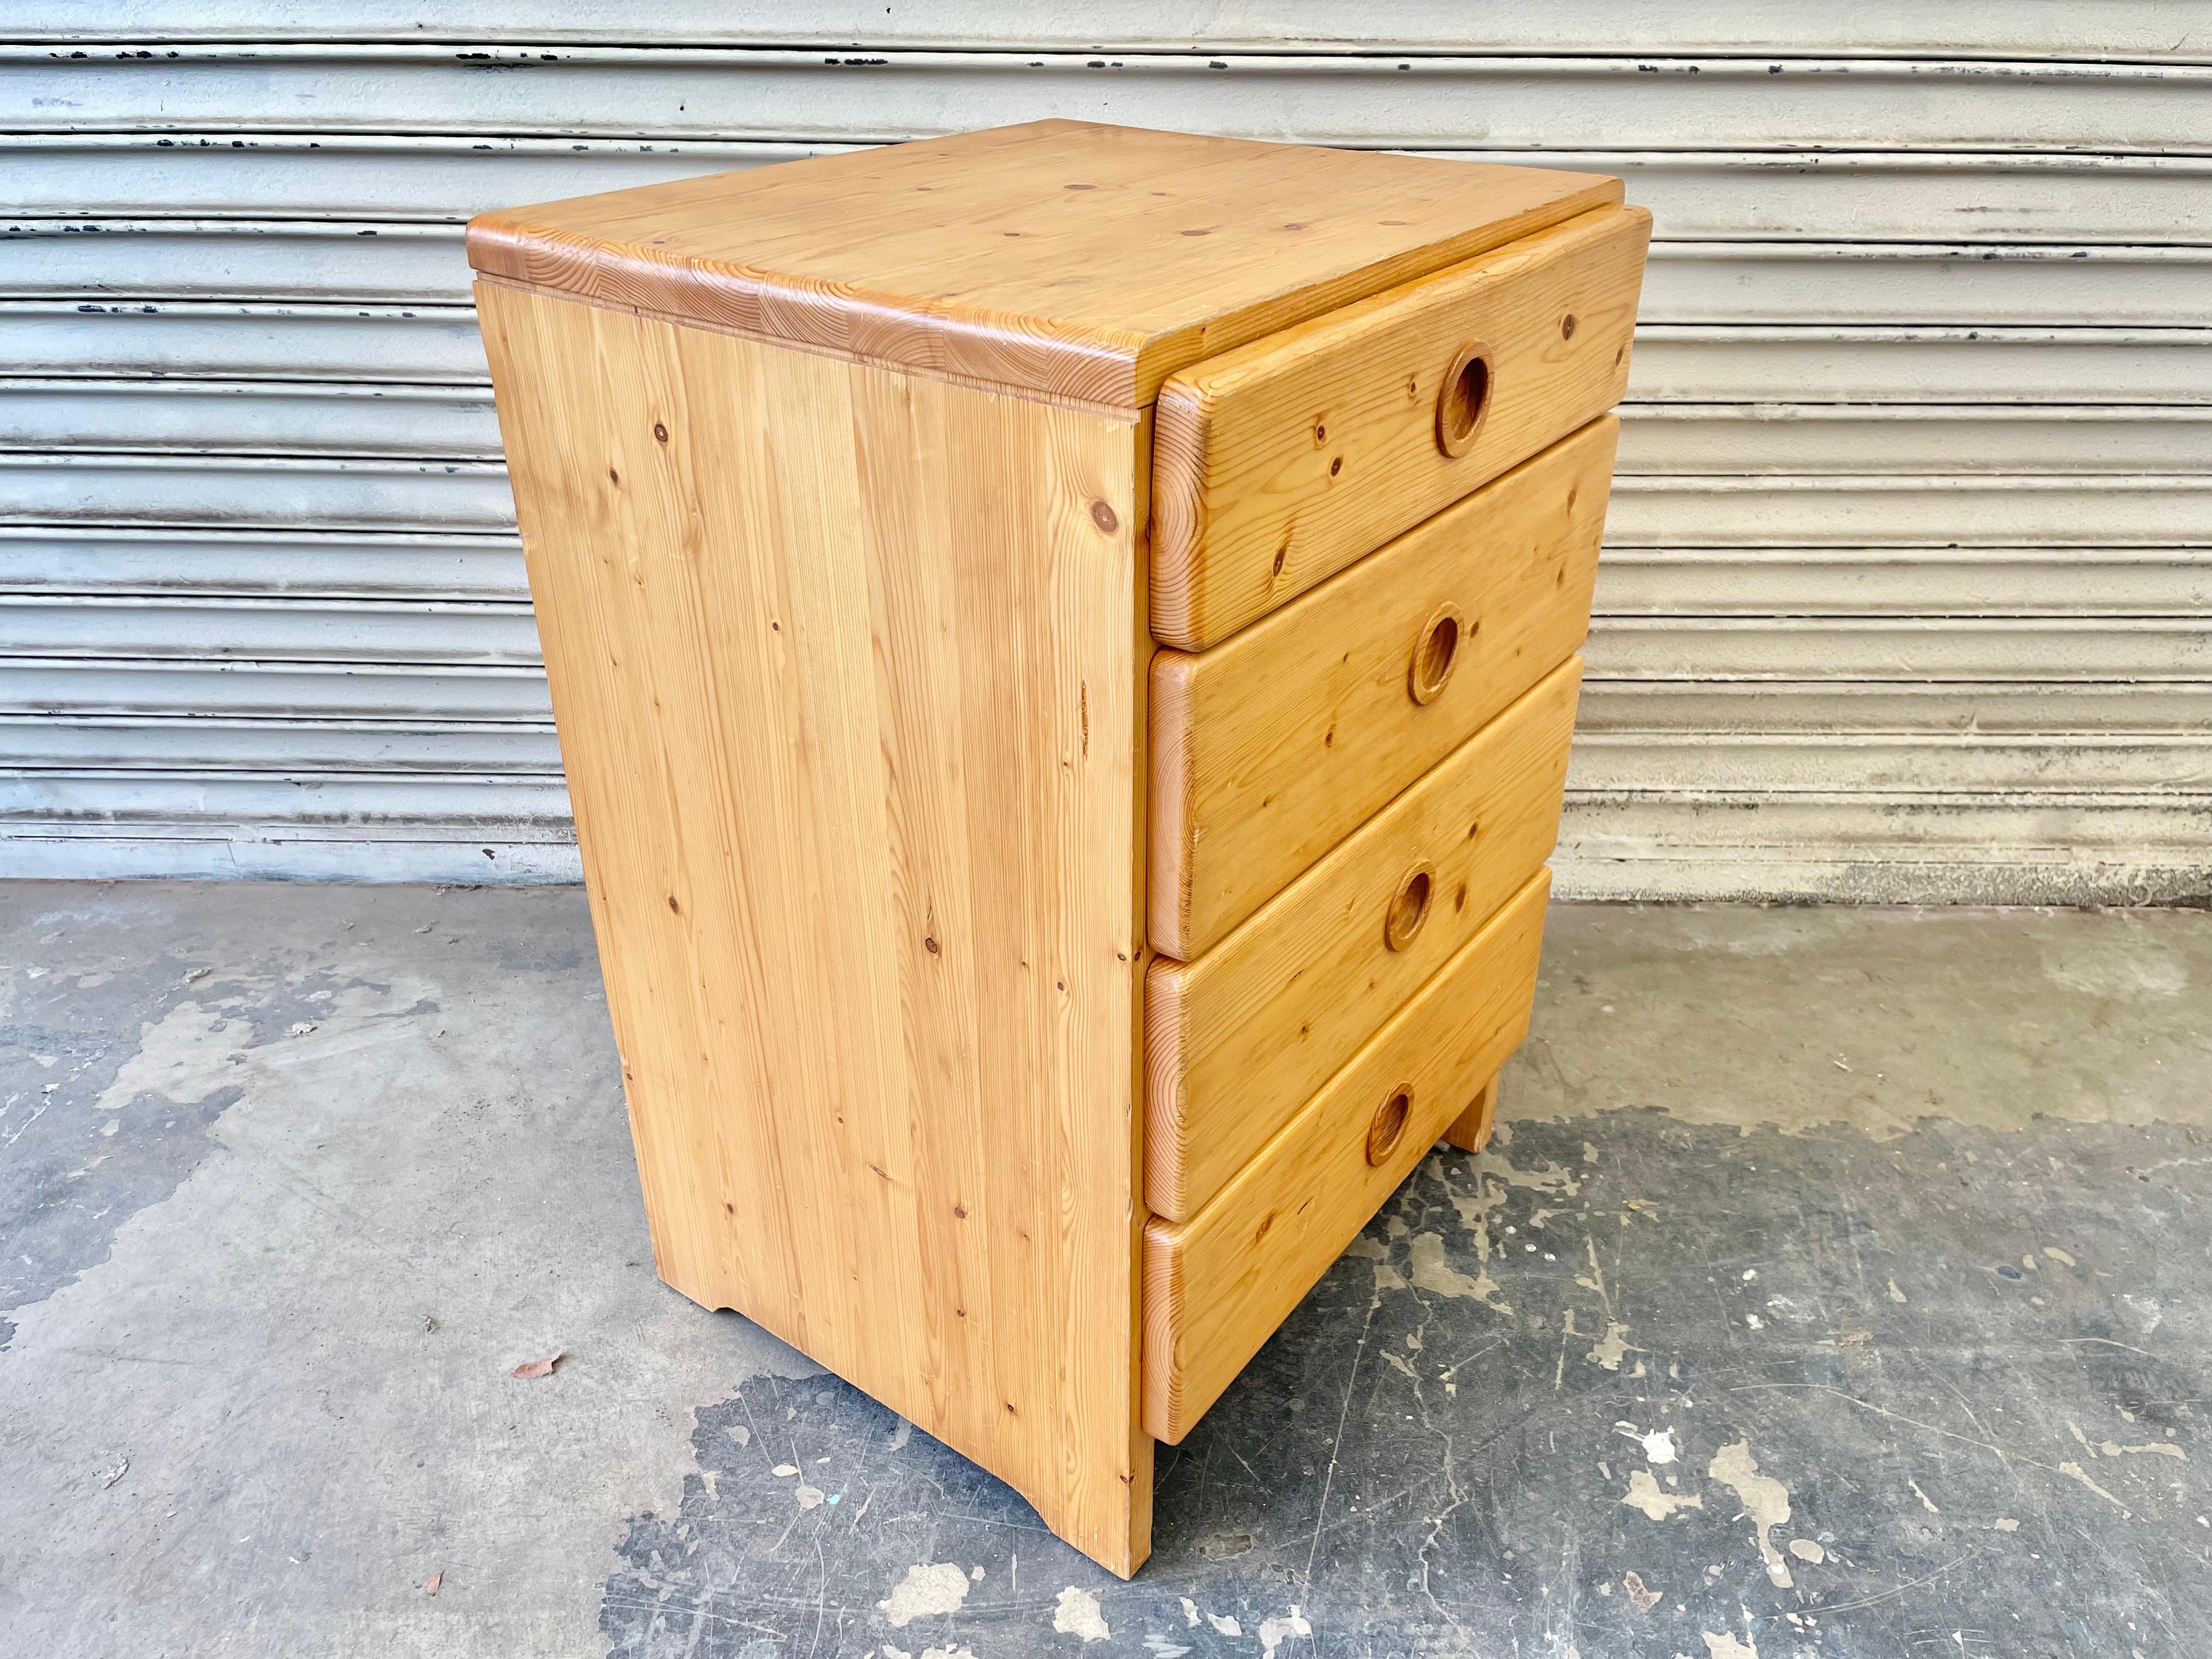 Pine chest of drawers by Charlotte Perriand for Les Arcs. 4 pull out drawers. Made of solid pine, circa 1960. Good original condition. Fun piece of collectible design from the popular French ski resort. 3 available. Priced individually.
     